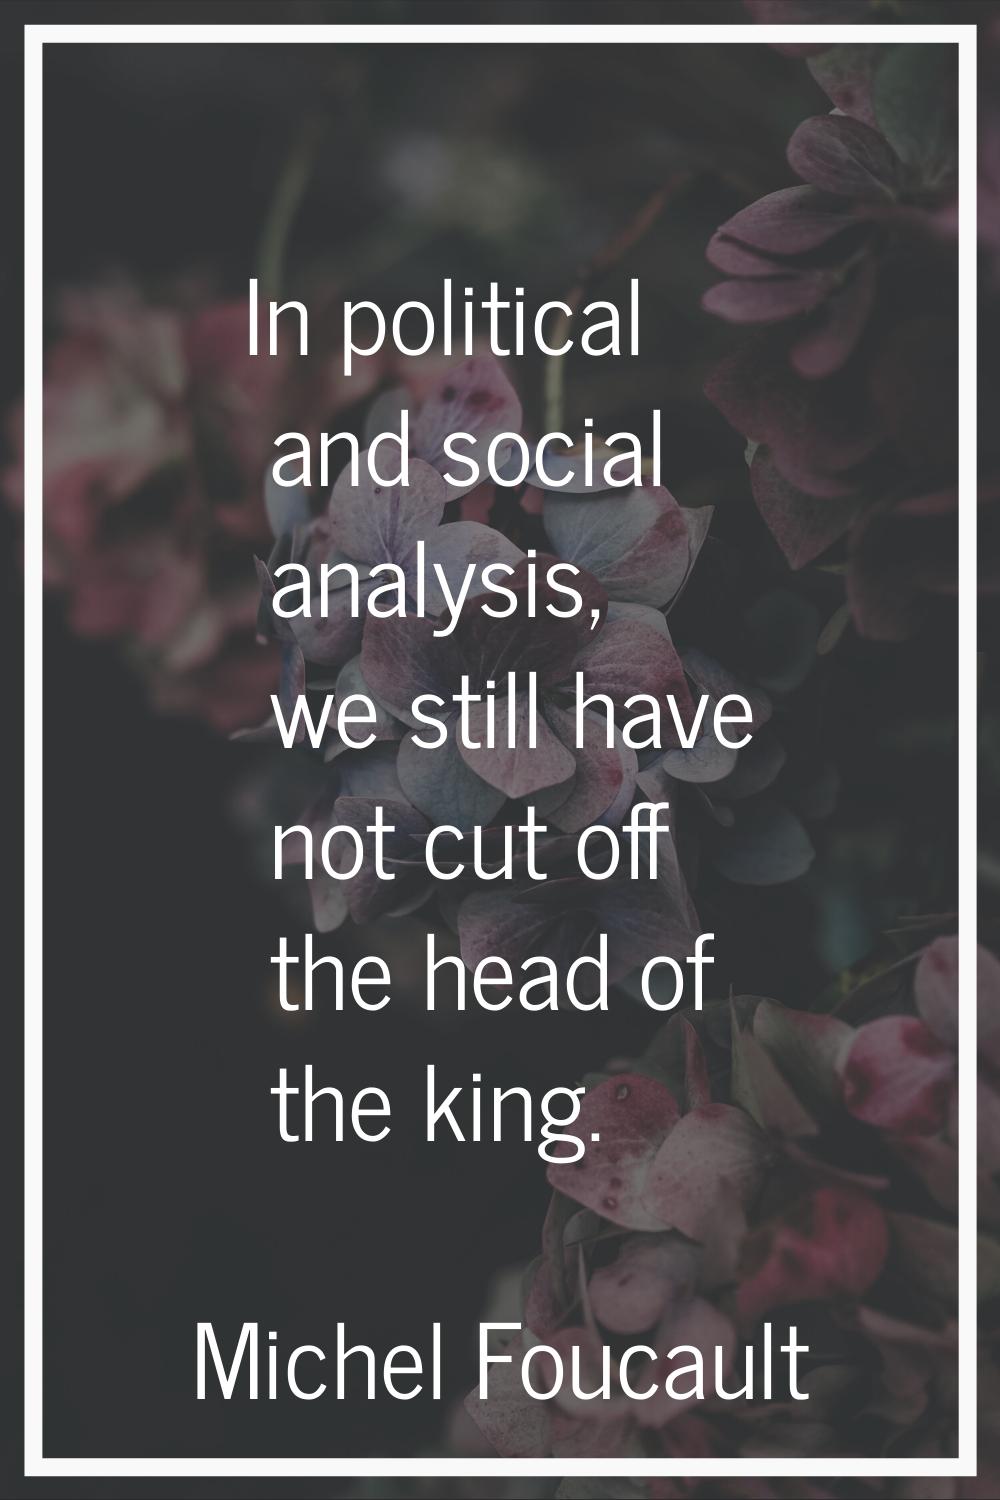 In political and social analysis, we still have not cut off the head of the king.